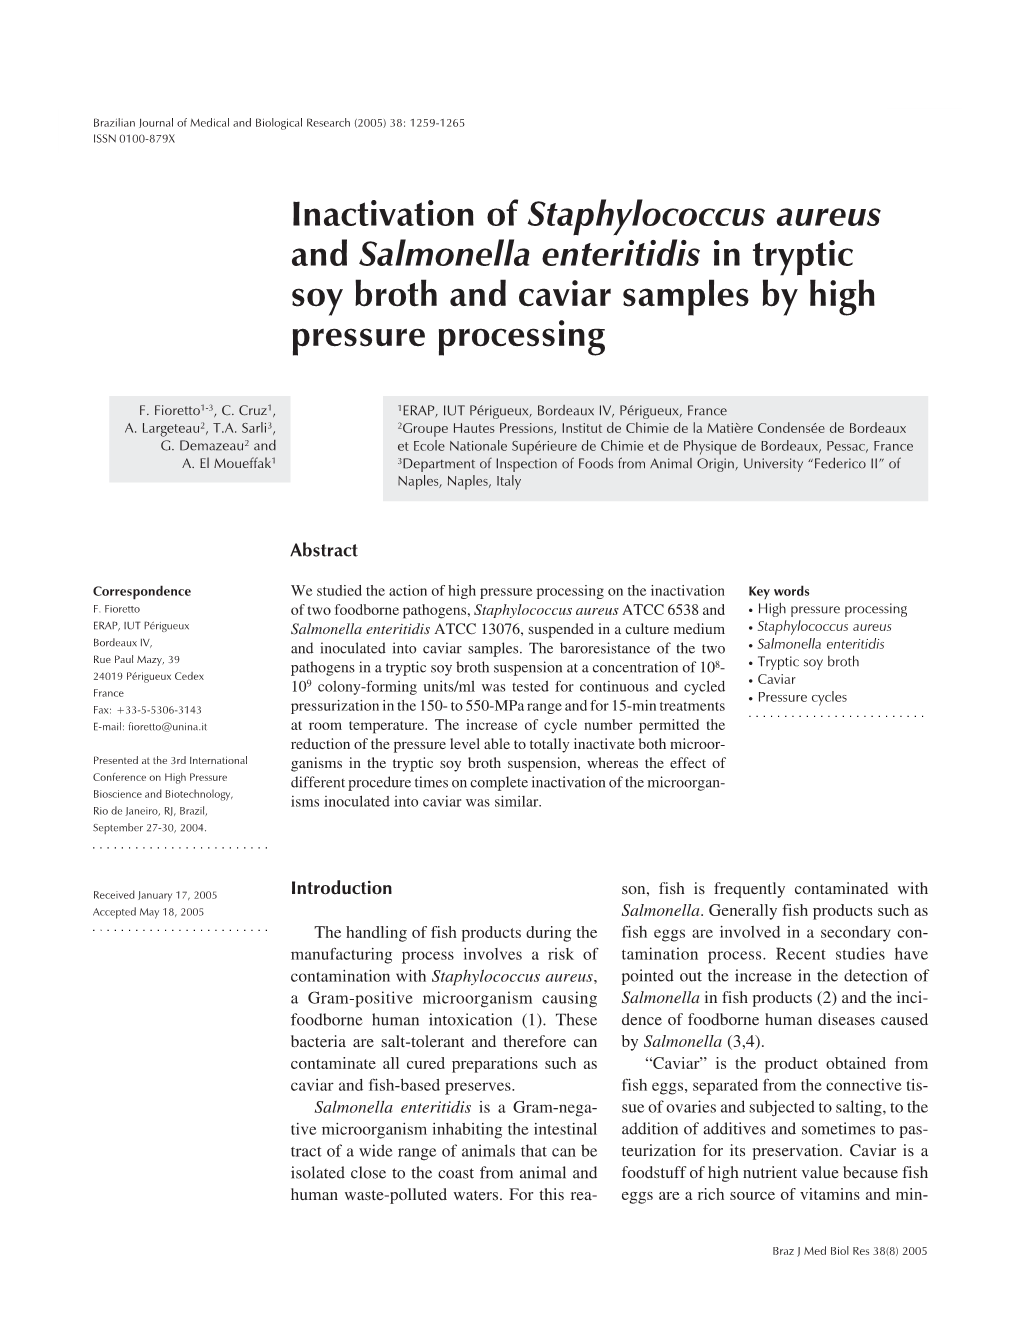 Inactivation of Staphylococcus Aureus and Salmonella Enteritidis in Tryptic Soy Broth and Caviar Samples by High Pressure Processing